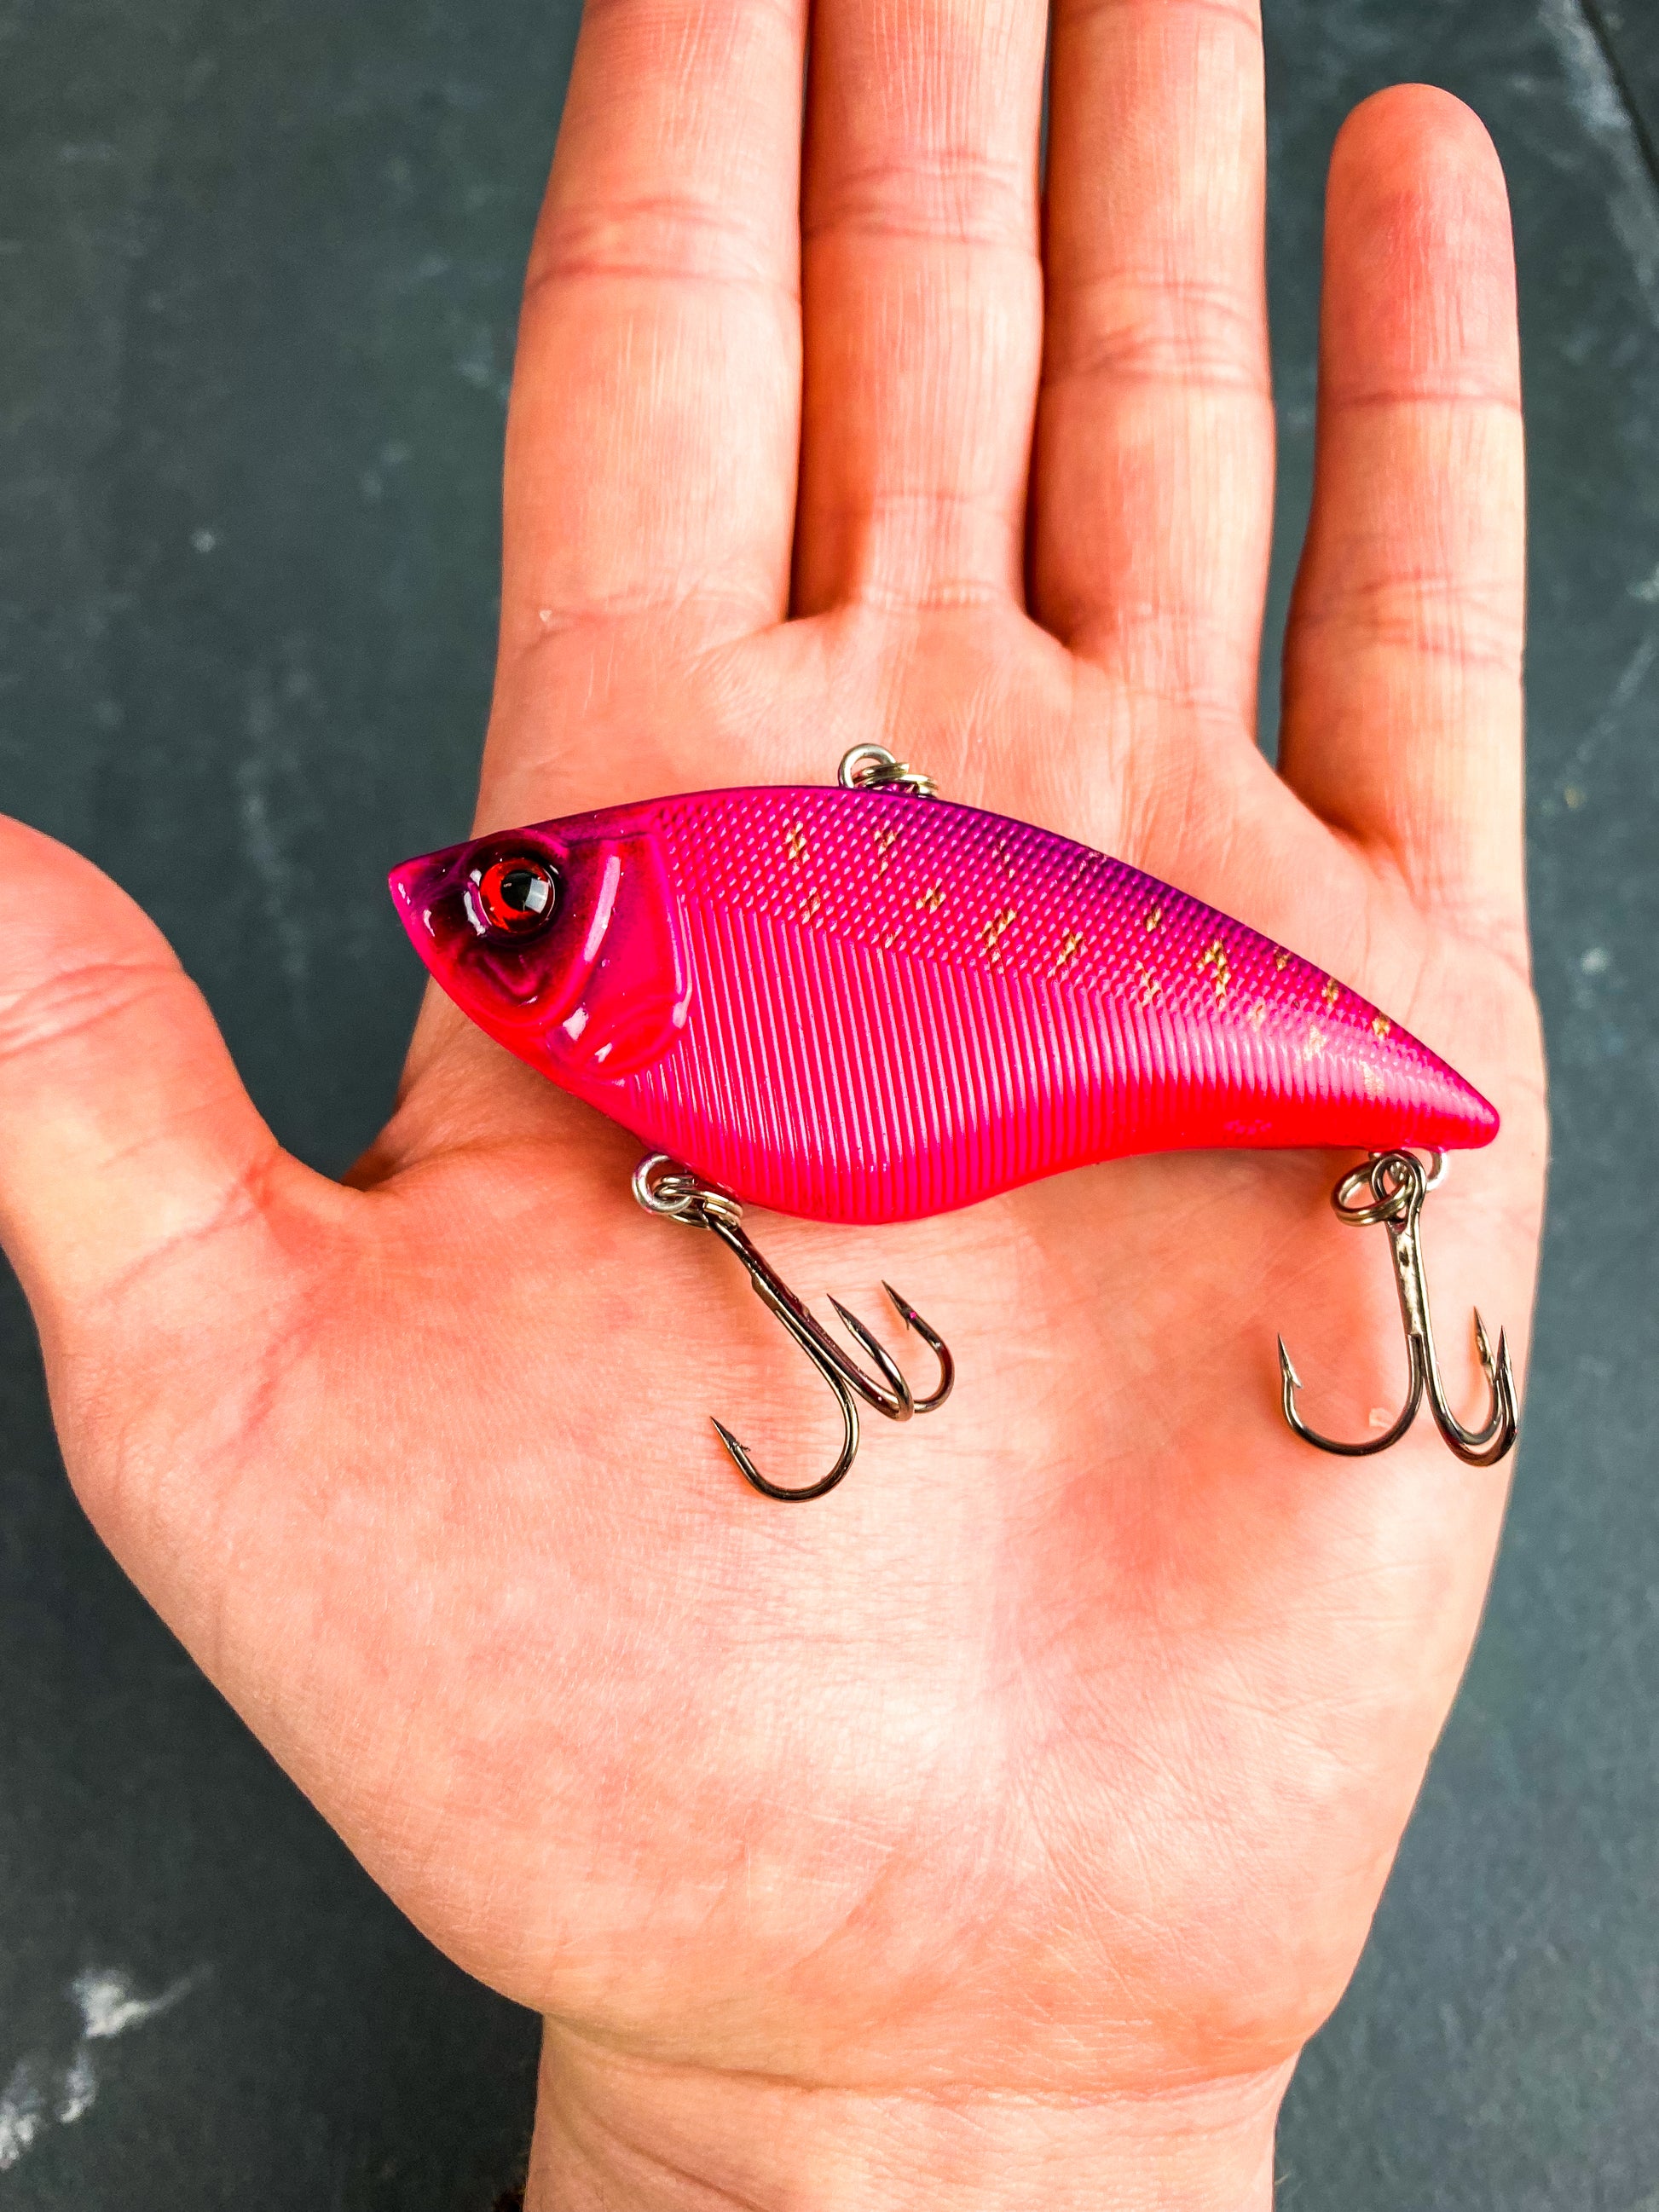 Lipless Shimmer Rattling Diving Minnow Crankbait Lures 10pcs Fishing Lure  Set Bass Fishing Lure Set Gifts for Him Gifts for Dad 